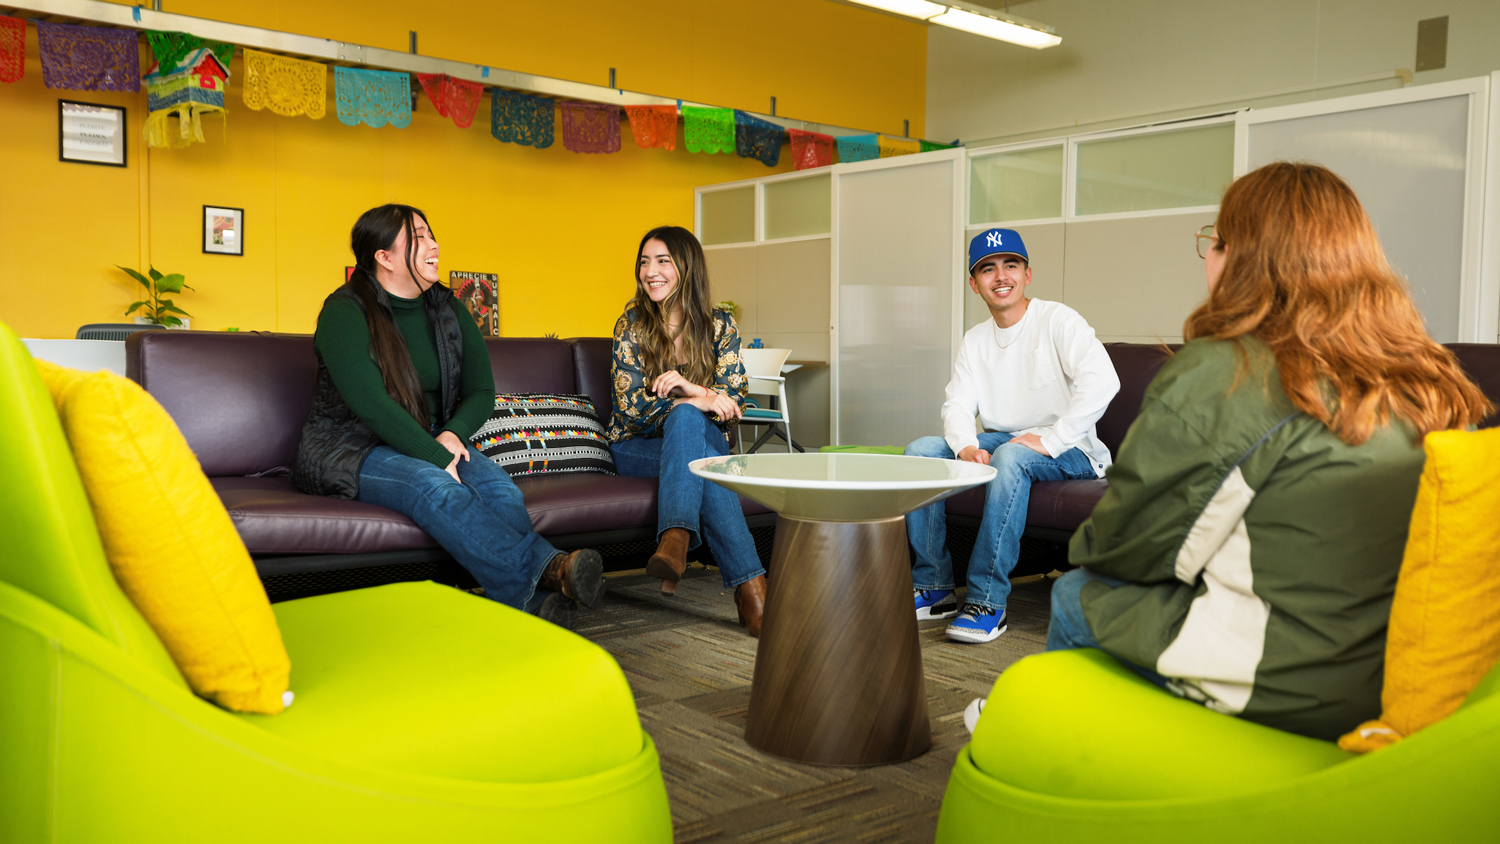 Four people sit on couches in a student center with yellow walls and colorful decorations